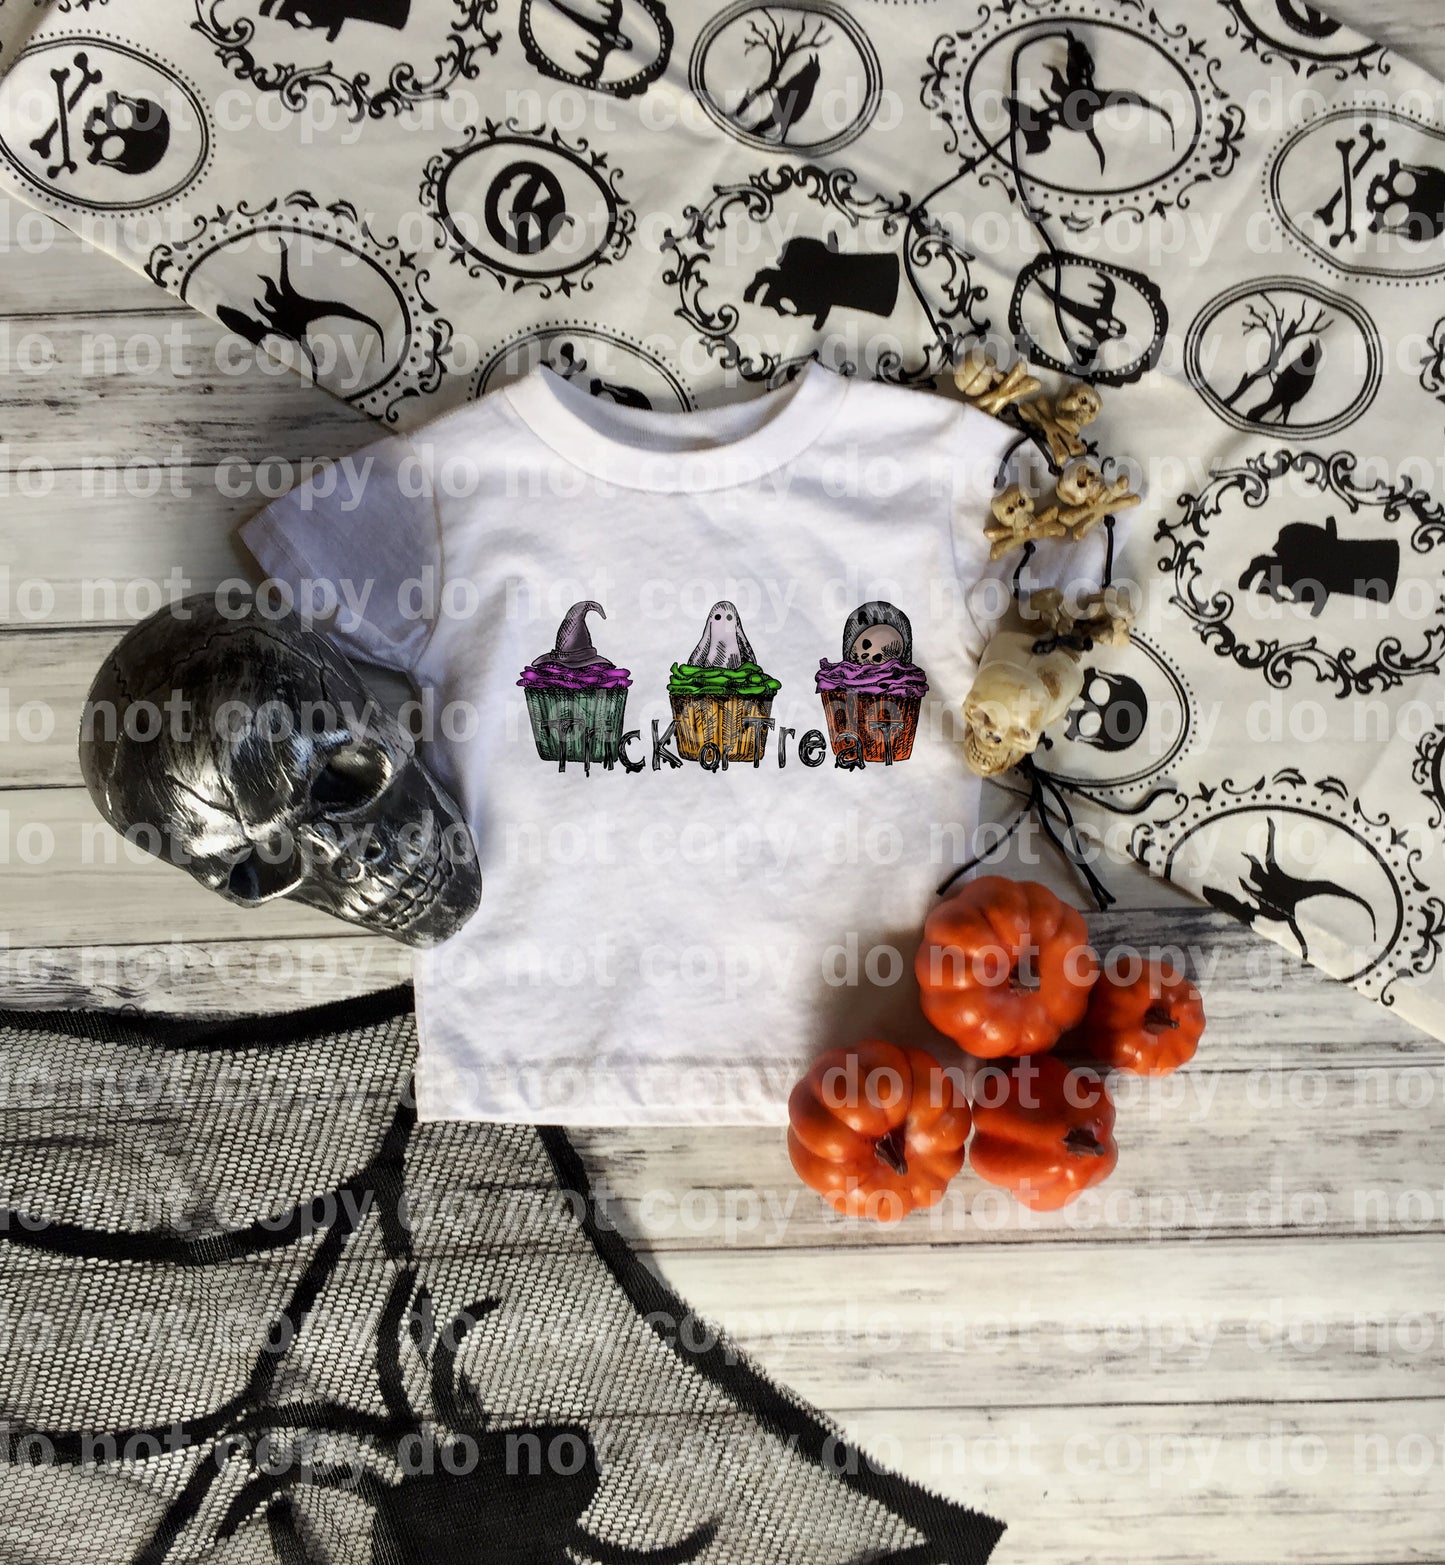 Trick or Treat Cupcakes Full Color/One Color Dream Print or Sublimation Print